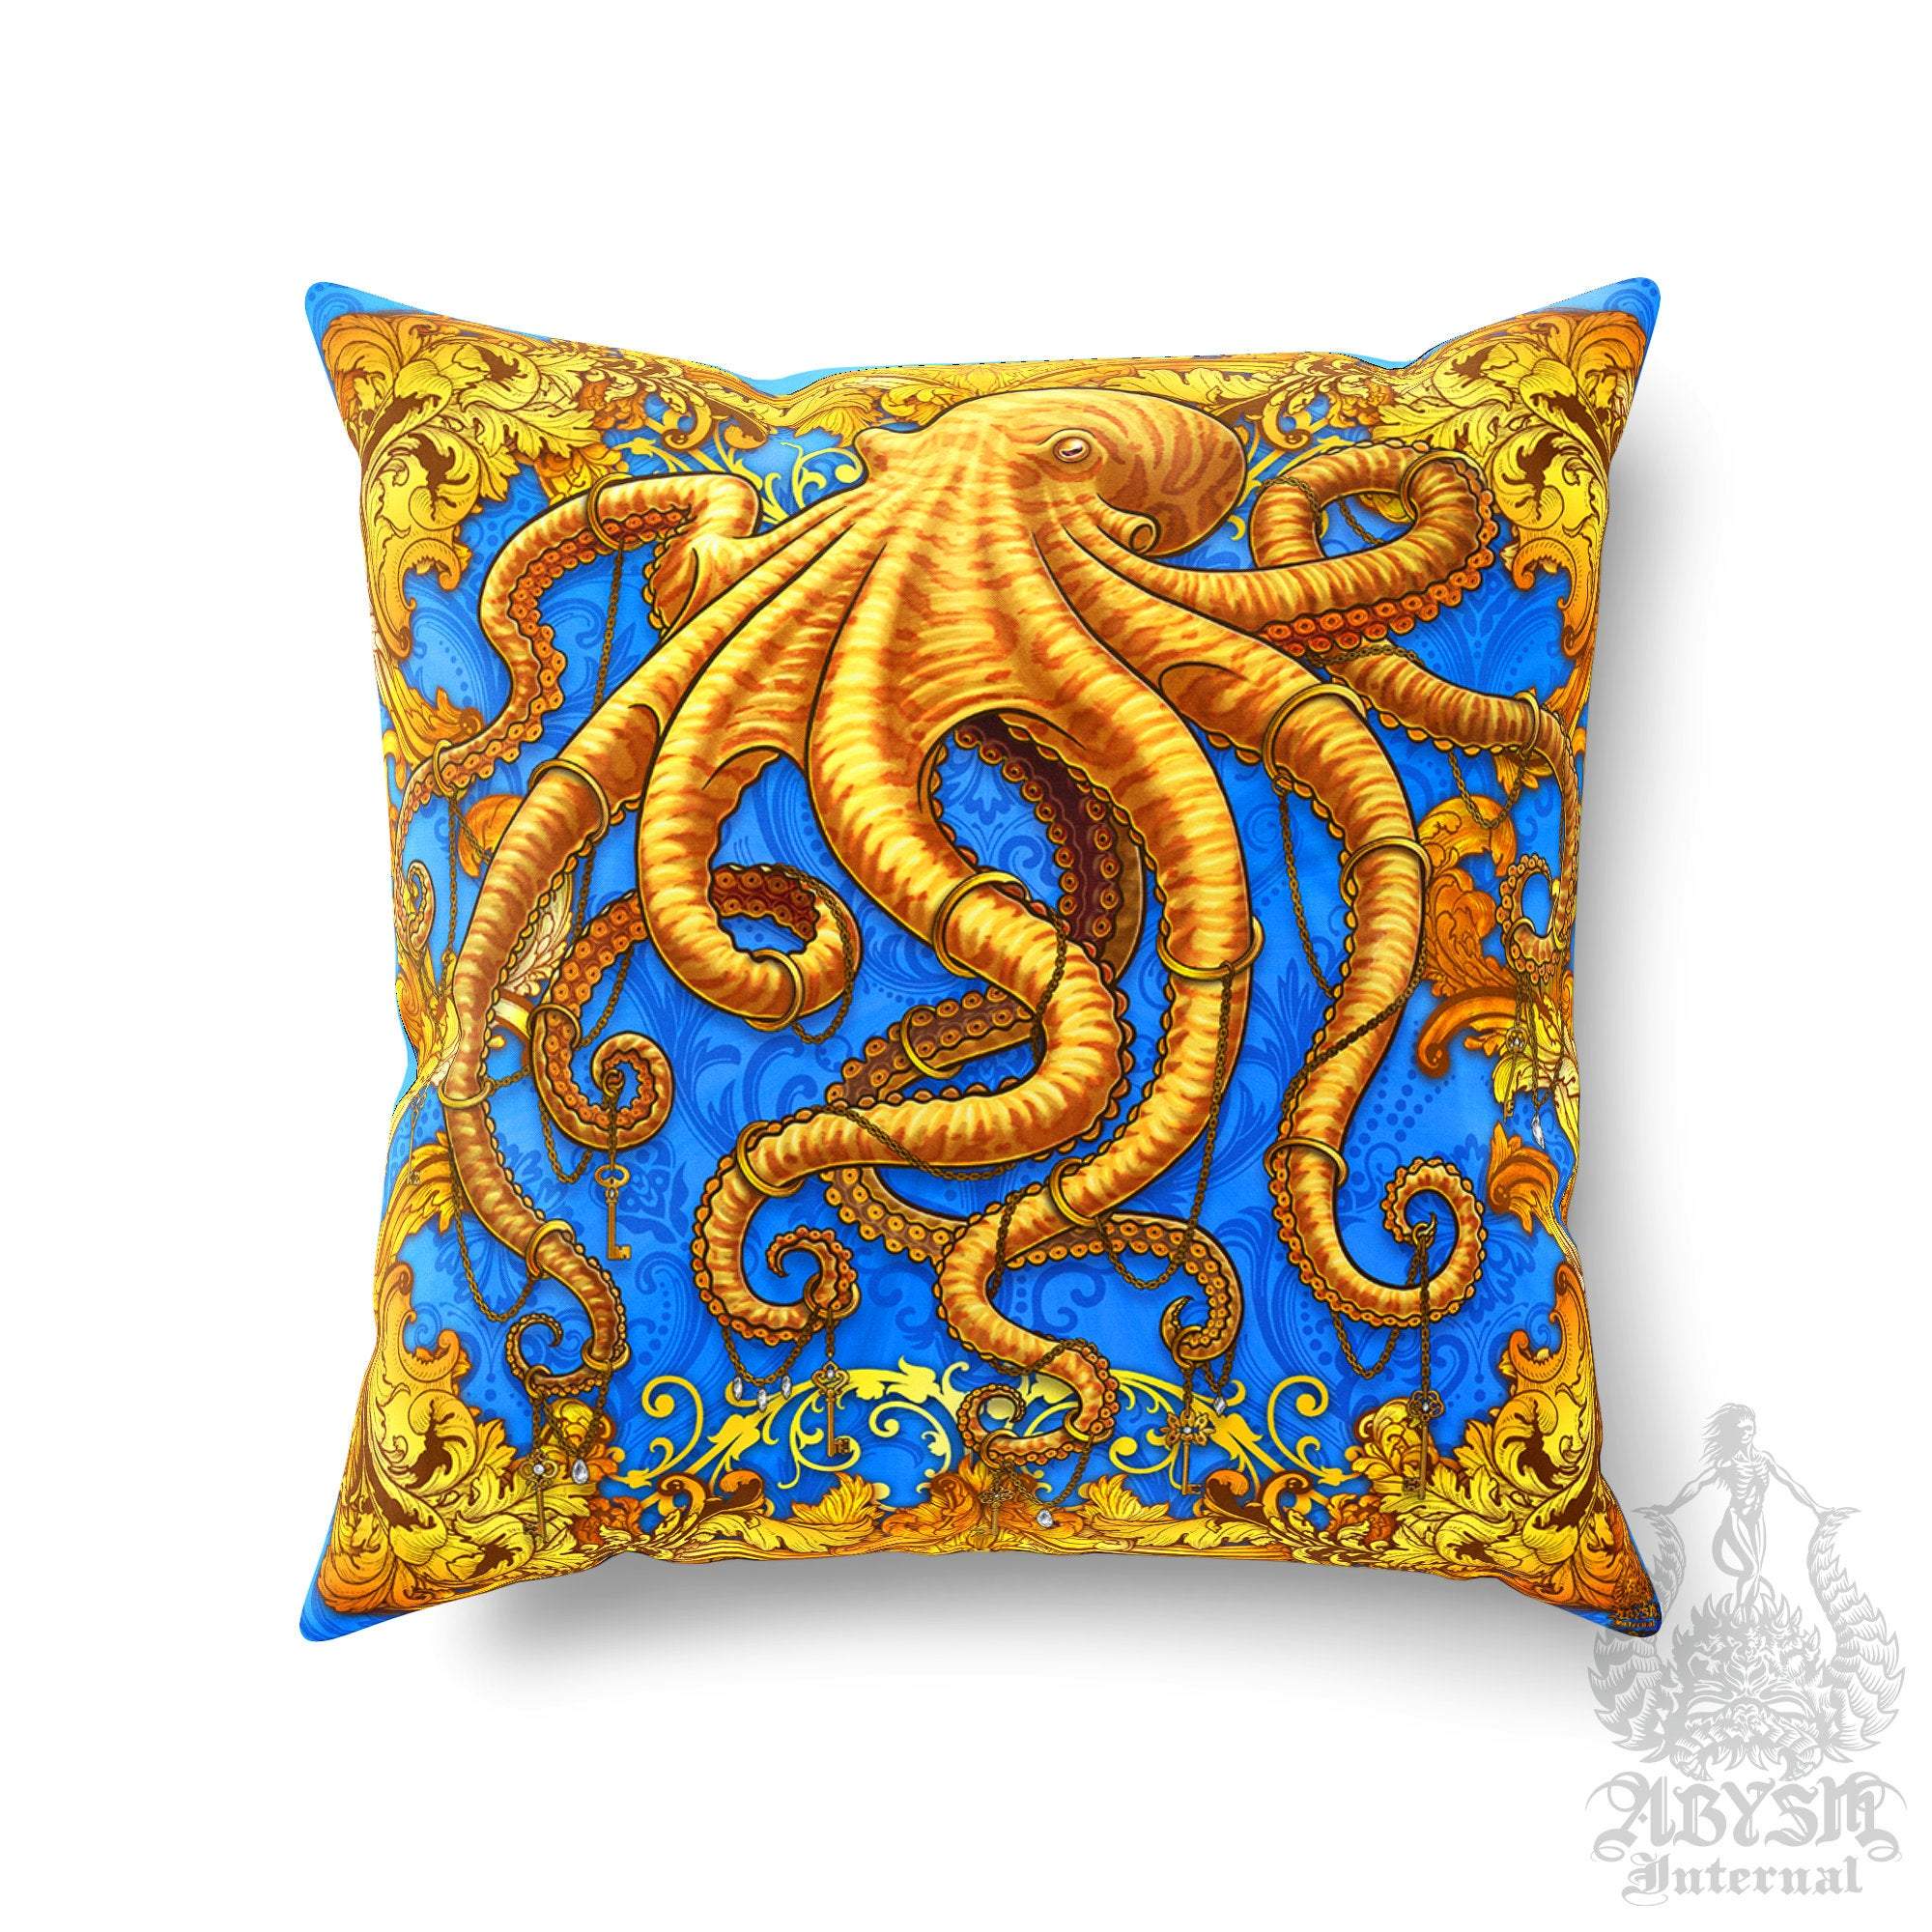 Octopus Throw Pillow, Decorative Accent Cushion, Coastal Decor, Indie and Eclectic Design, Funky Home - Cyan & Gold - Abysm Internal